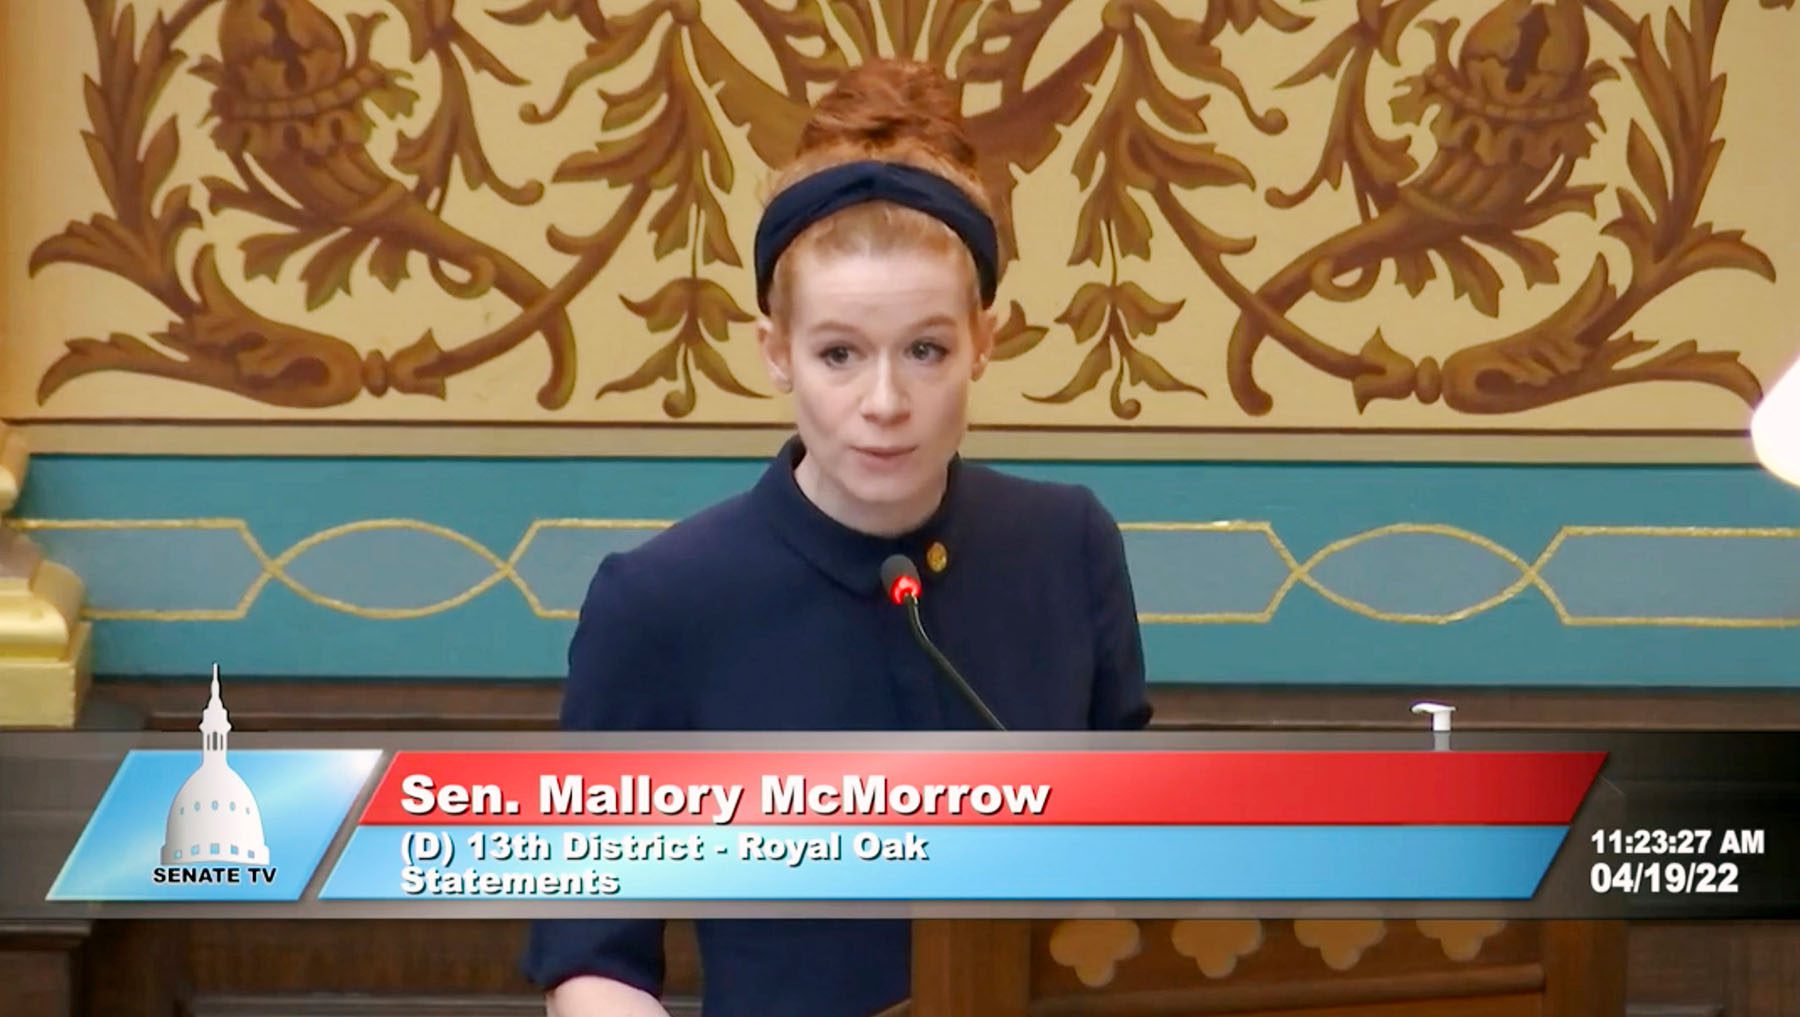 A screen grab of the viral speech in which Mallory McMorrow defends herself against false accusations made by a Republican colleague of hers. In the video, she is standing at a podium at the Michigan State Senate.